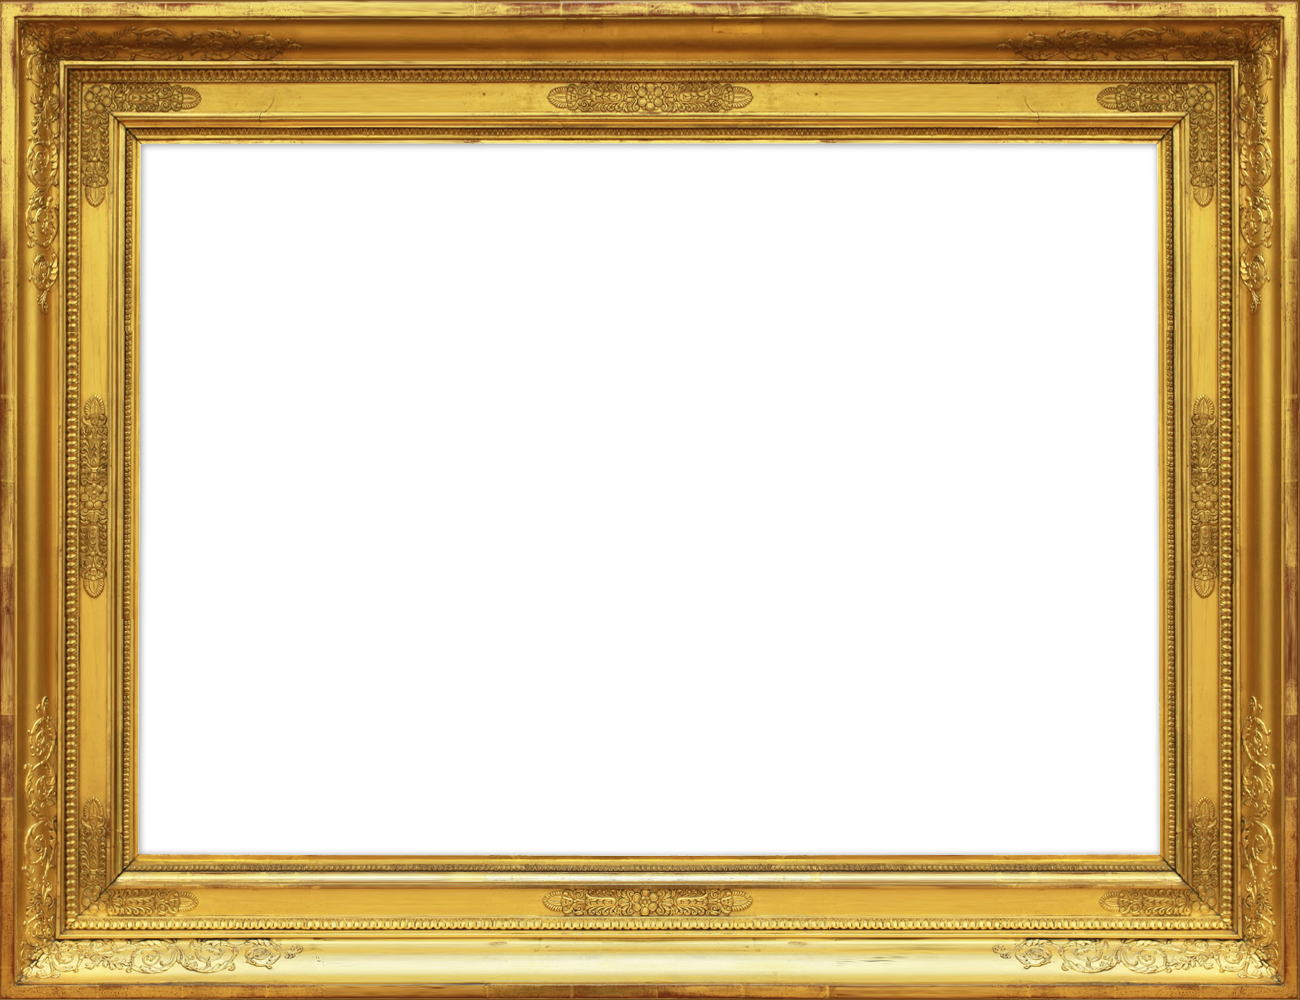 Download Decorative Picture Arts Layers Frame Decor Frames HQ PNG Image